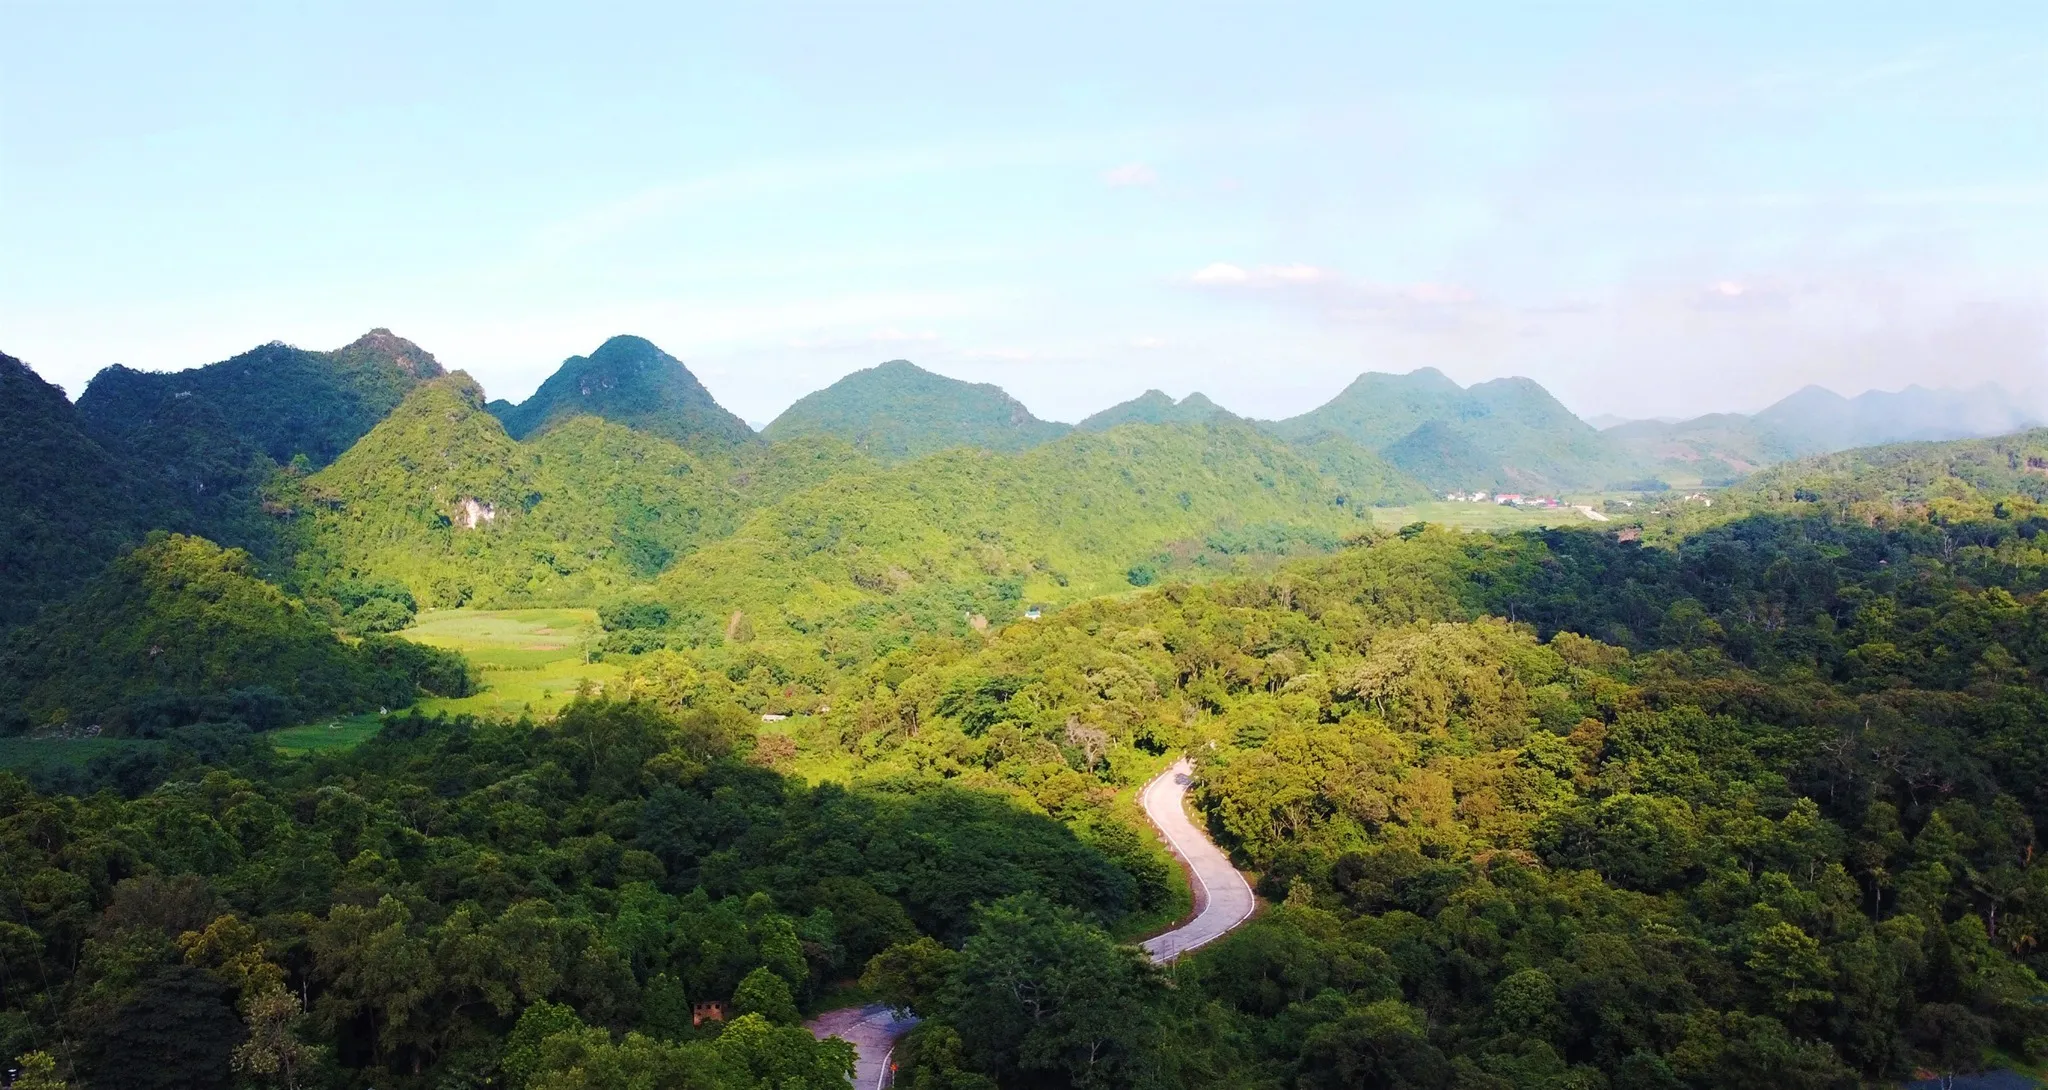 Cuc Phuong National Park viewed from above